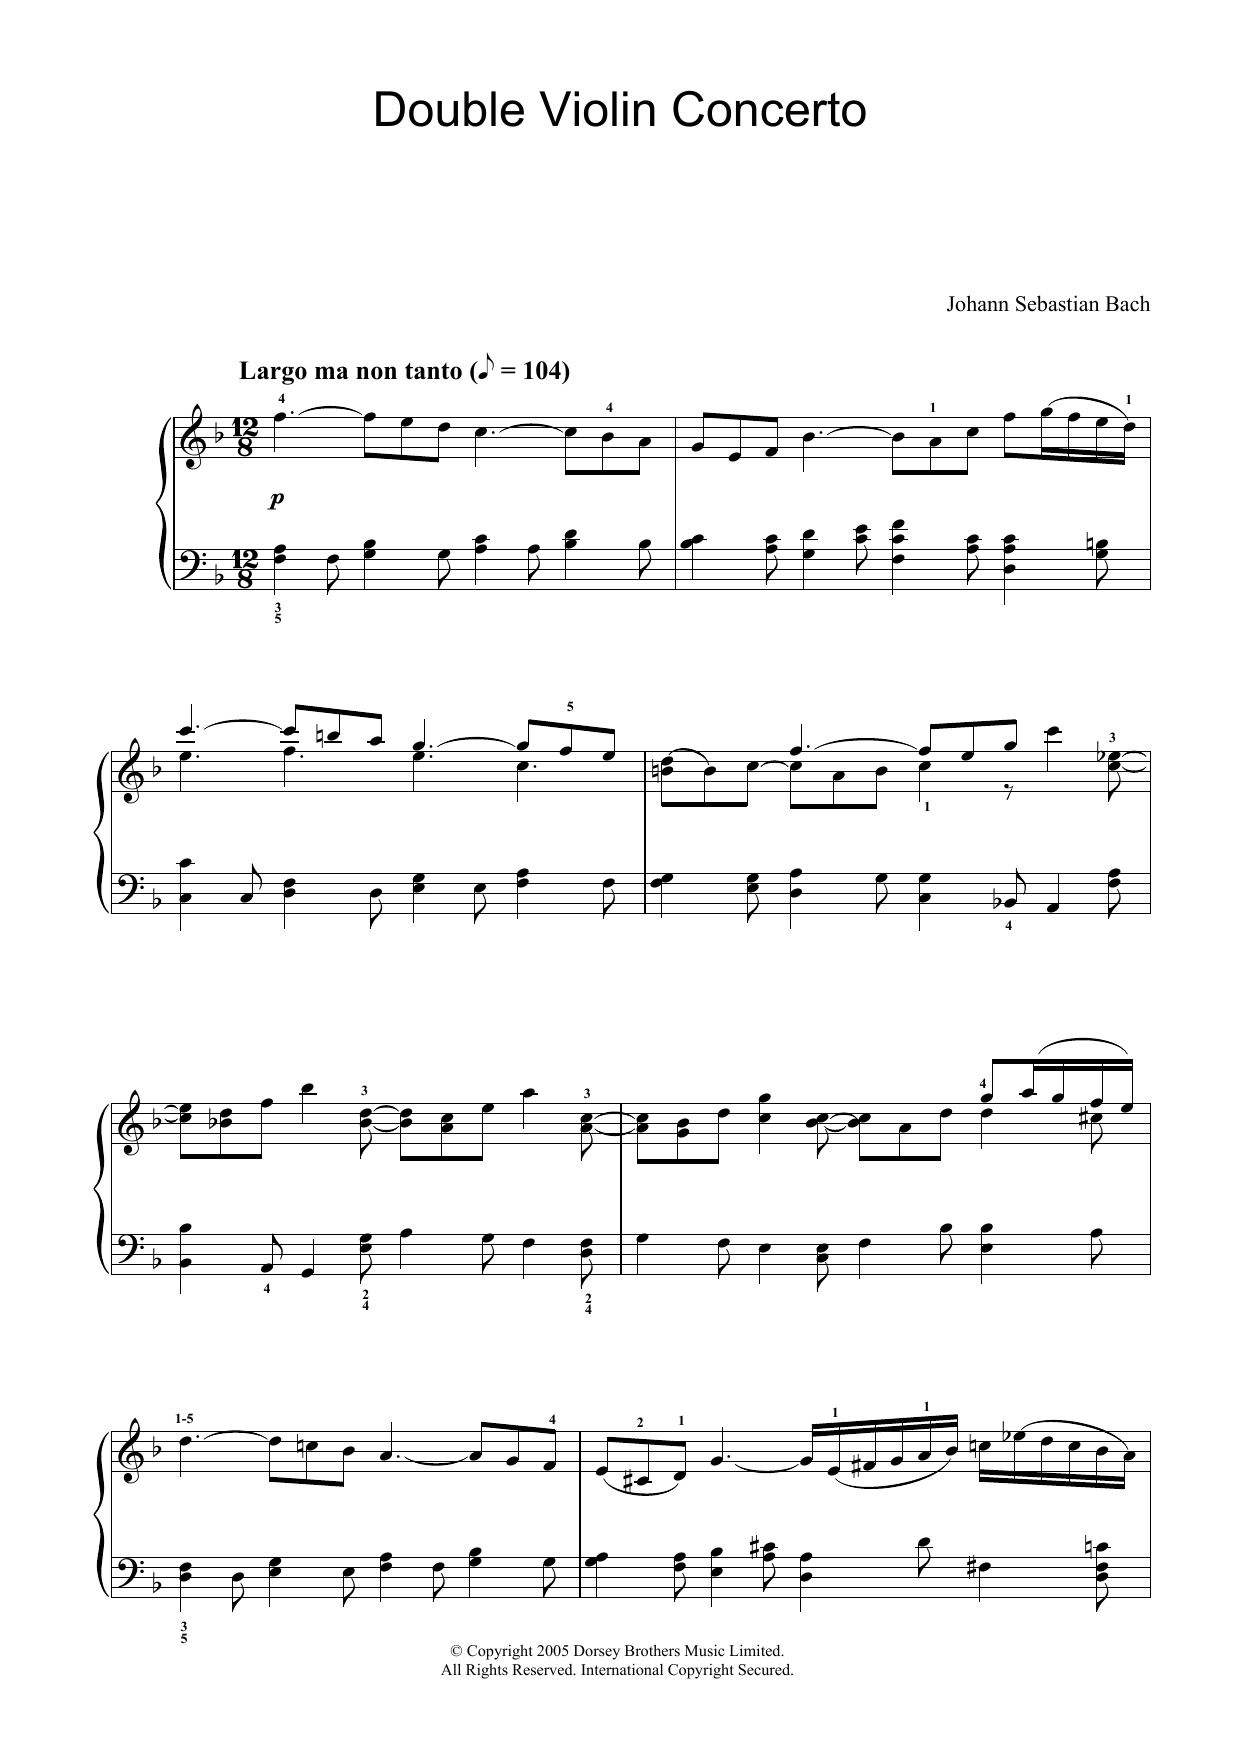 Johann Bach "Double Violin 2nd Movement" Sheet Music PDF Notes, Chords | Classical Piano Solo Download Printable. SKU: 32910